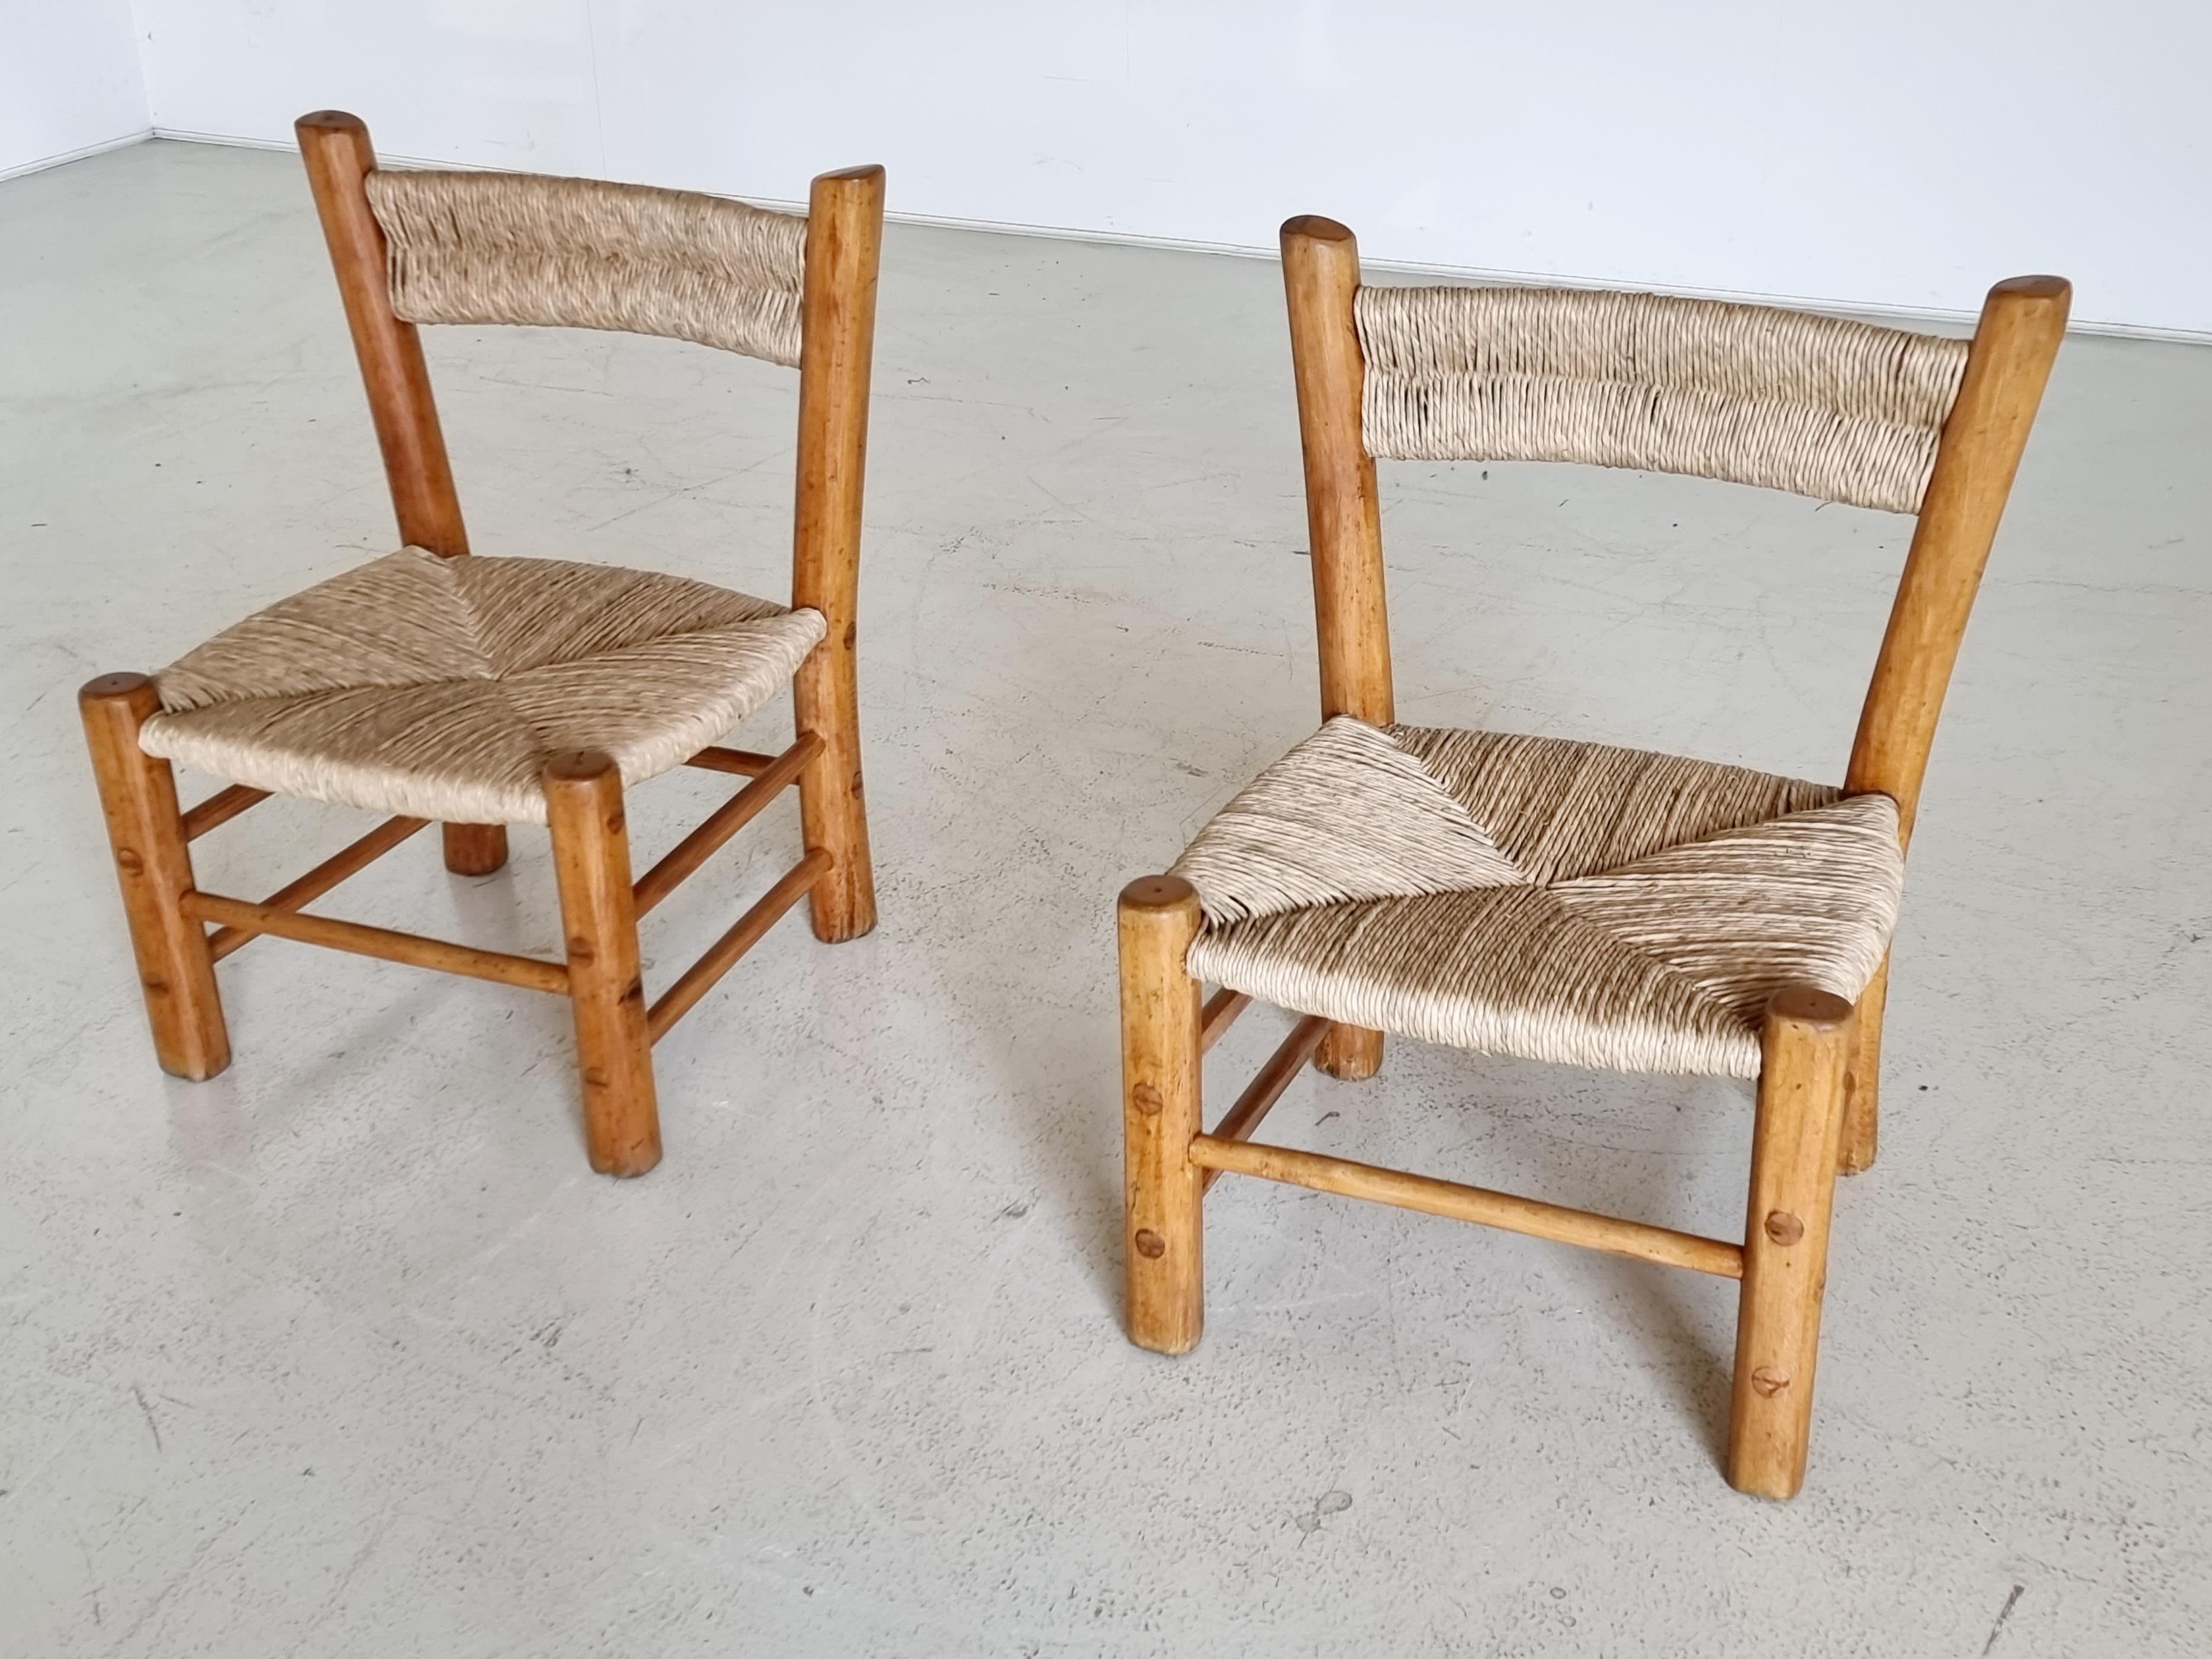 Set of 2 chairs, elmwood, straw, France, 1960s.

These beautifully constructed farmer chairs have a rustic character with great quality of elegance. The seat and back are covered with straw that adds a warm touch to the chairs. The backrests point